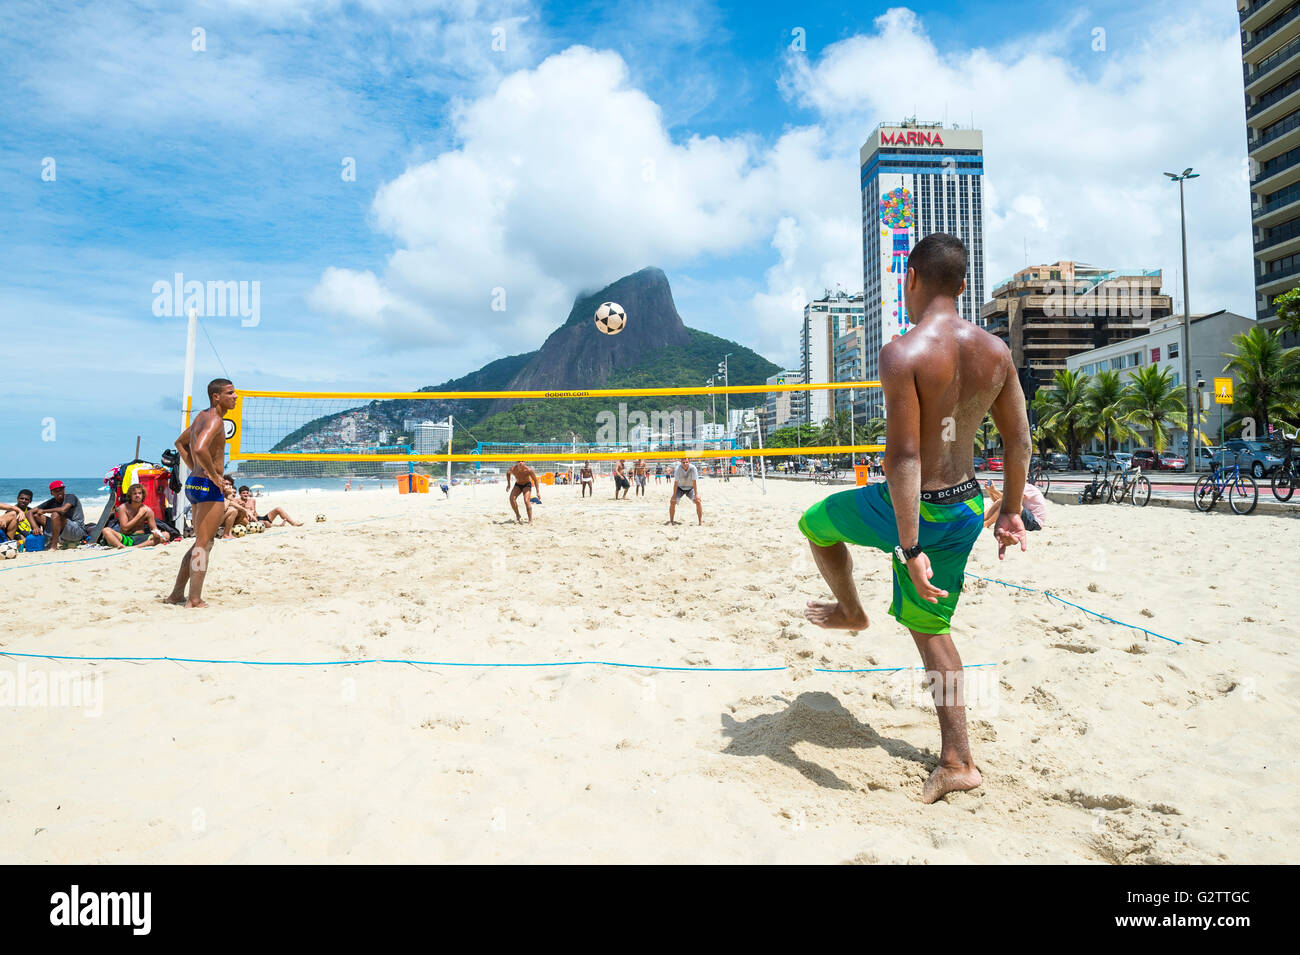 RIO DE JANEIRO - MARCH 17, 2016: Young Brazilian men play a game of futevolei (footvolley), combining football and volleyball Stock Photo